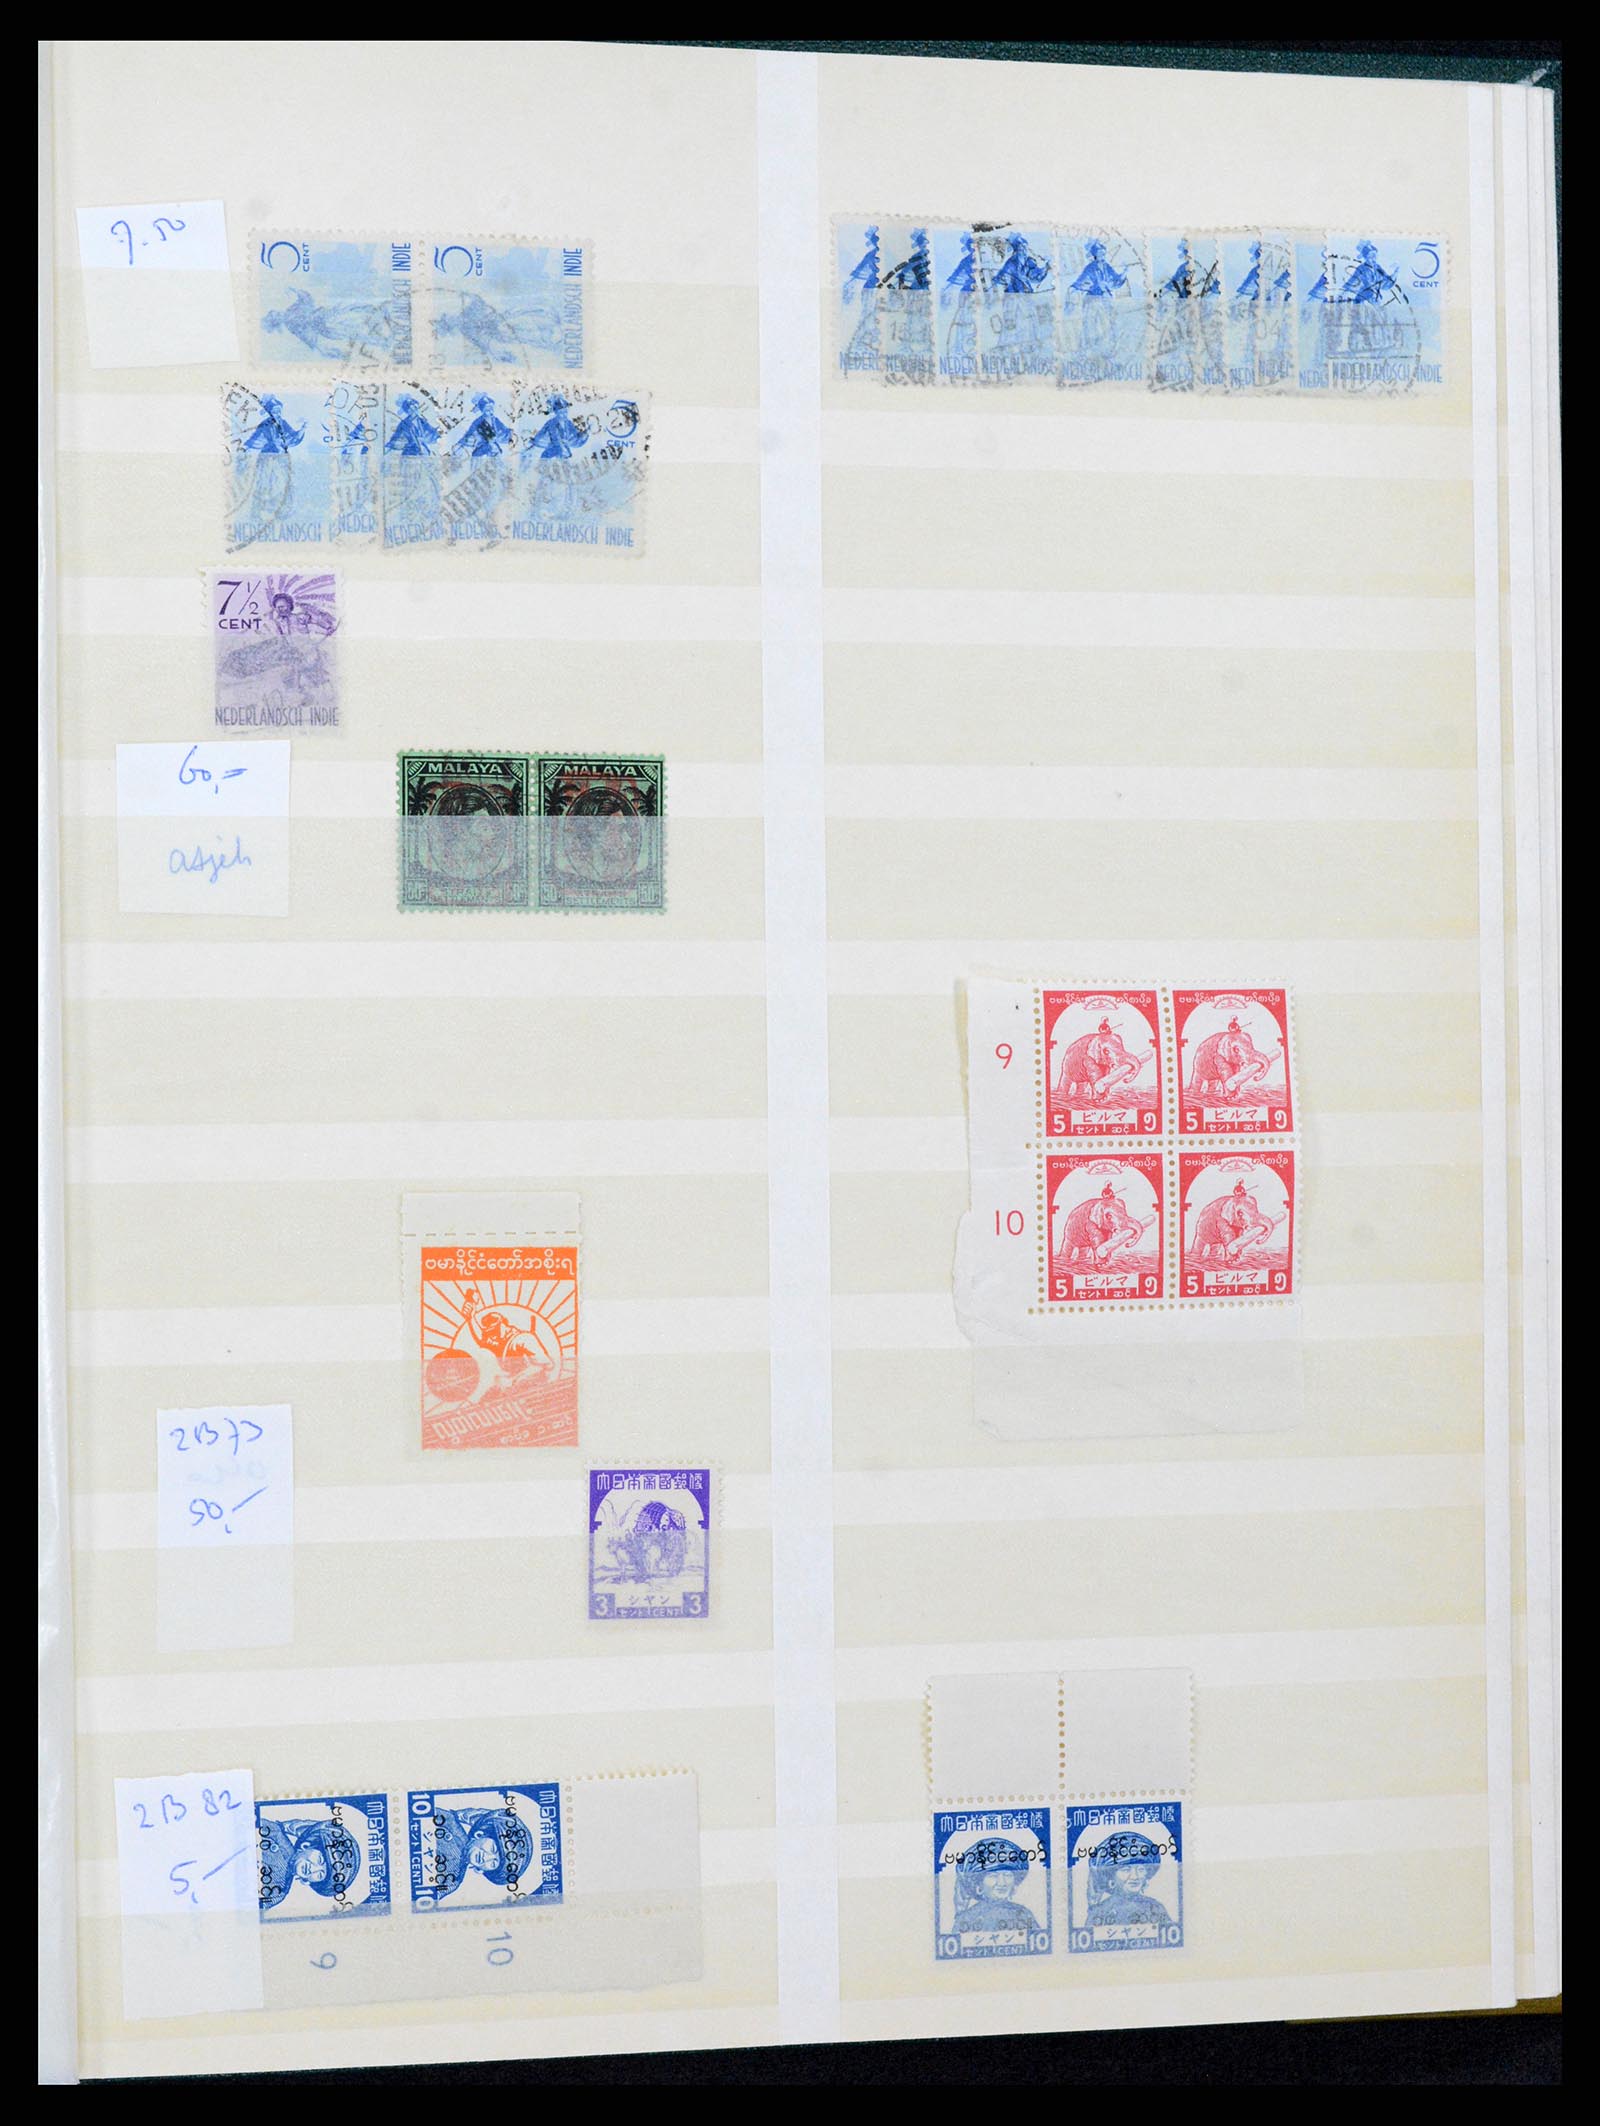 37429 033 - Stamp collection 37429 Japanese occupation Dutch East Indies 1942-1945.